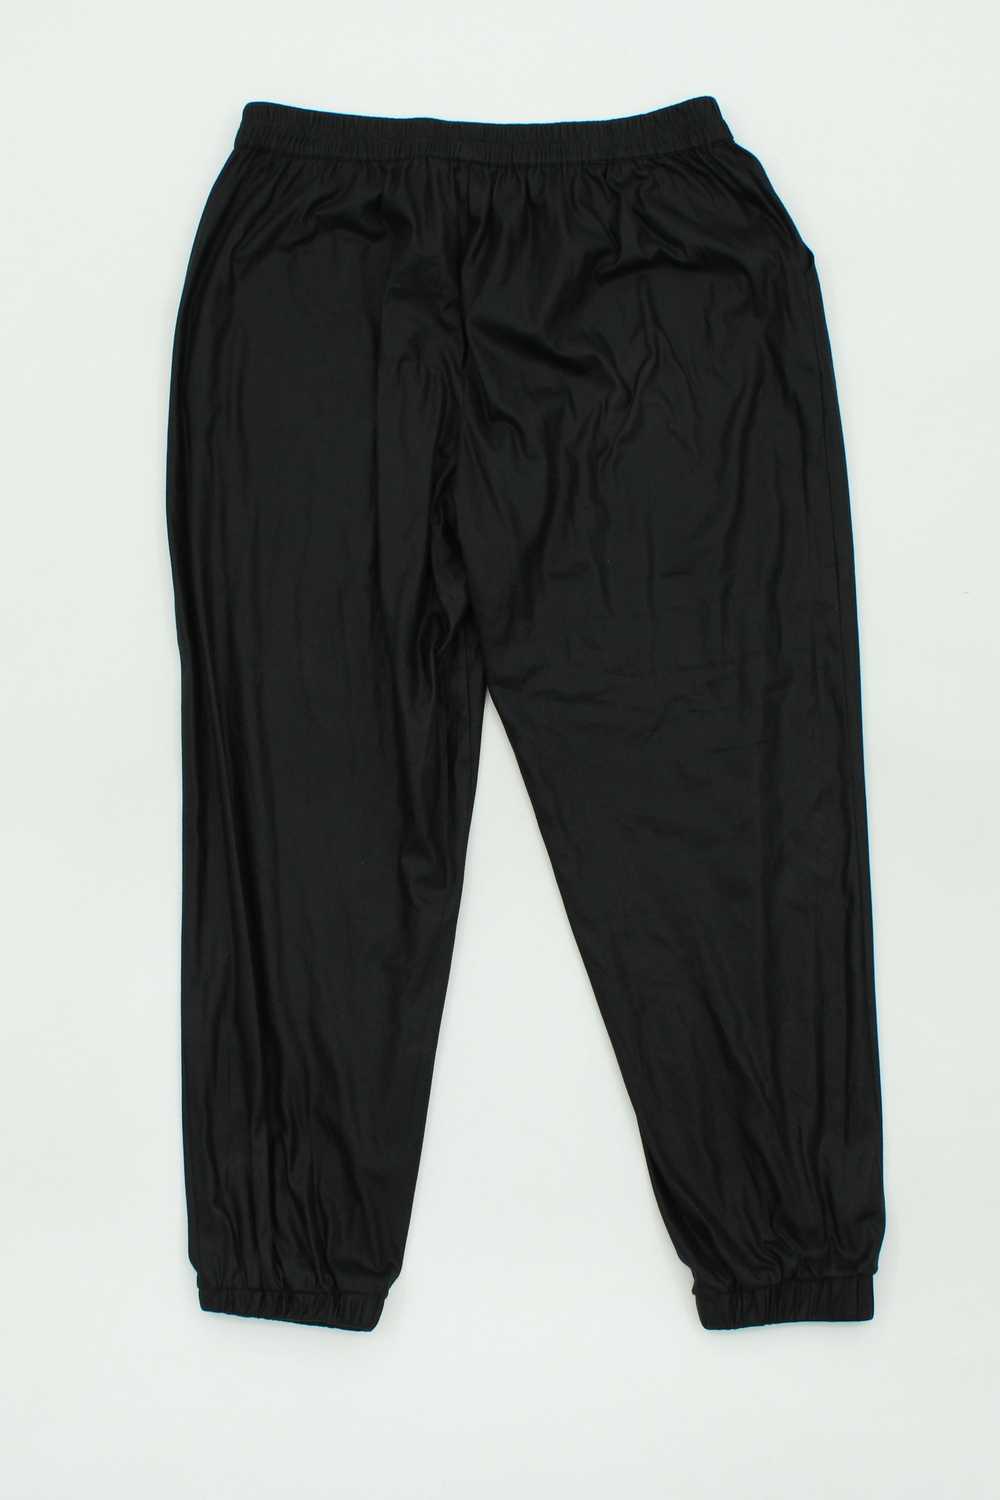 Bcbgeneration Women's Trousers L Black 100% Other - image 7